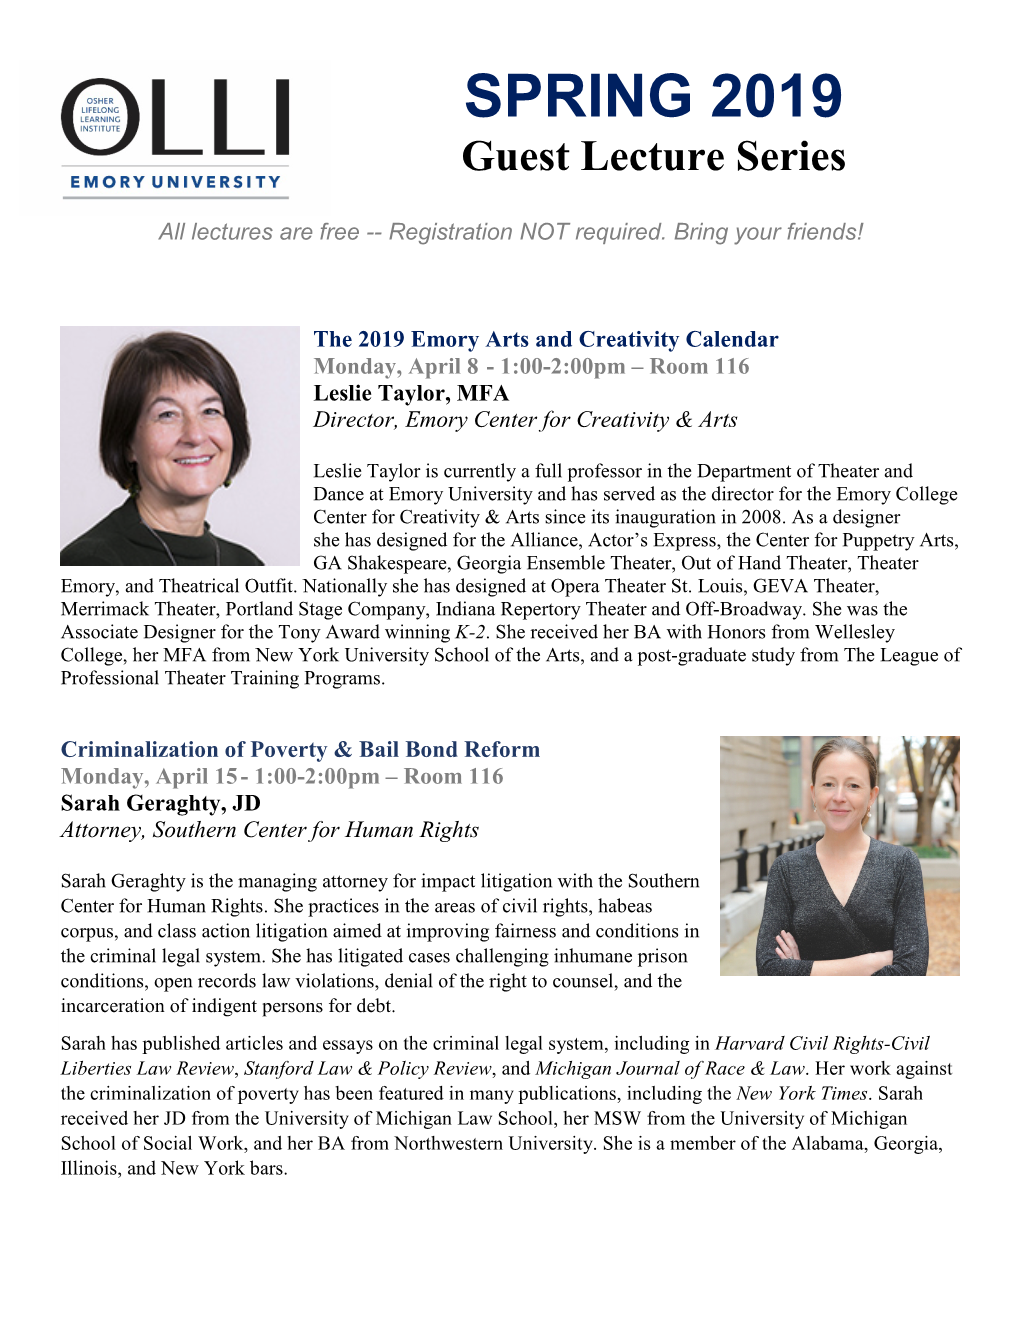 SPRING 2019 Guest Lecture Series